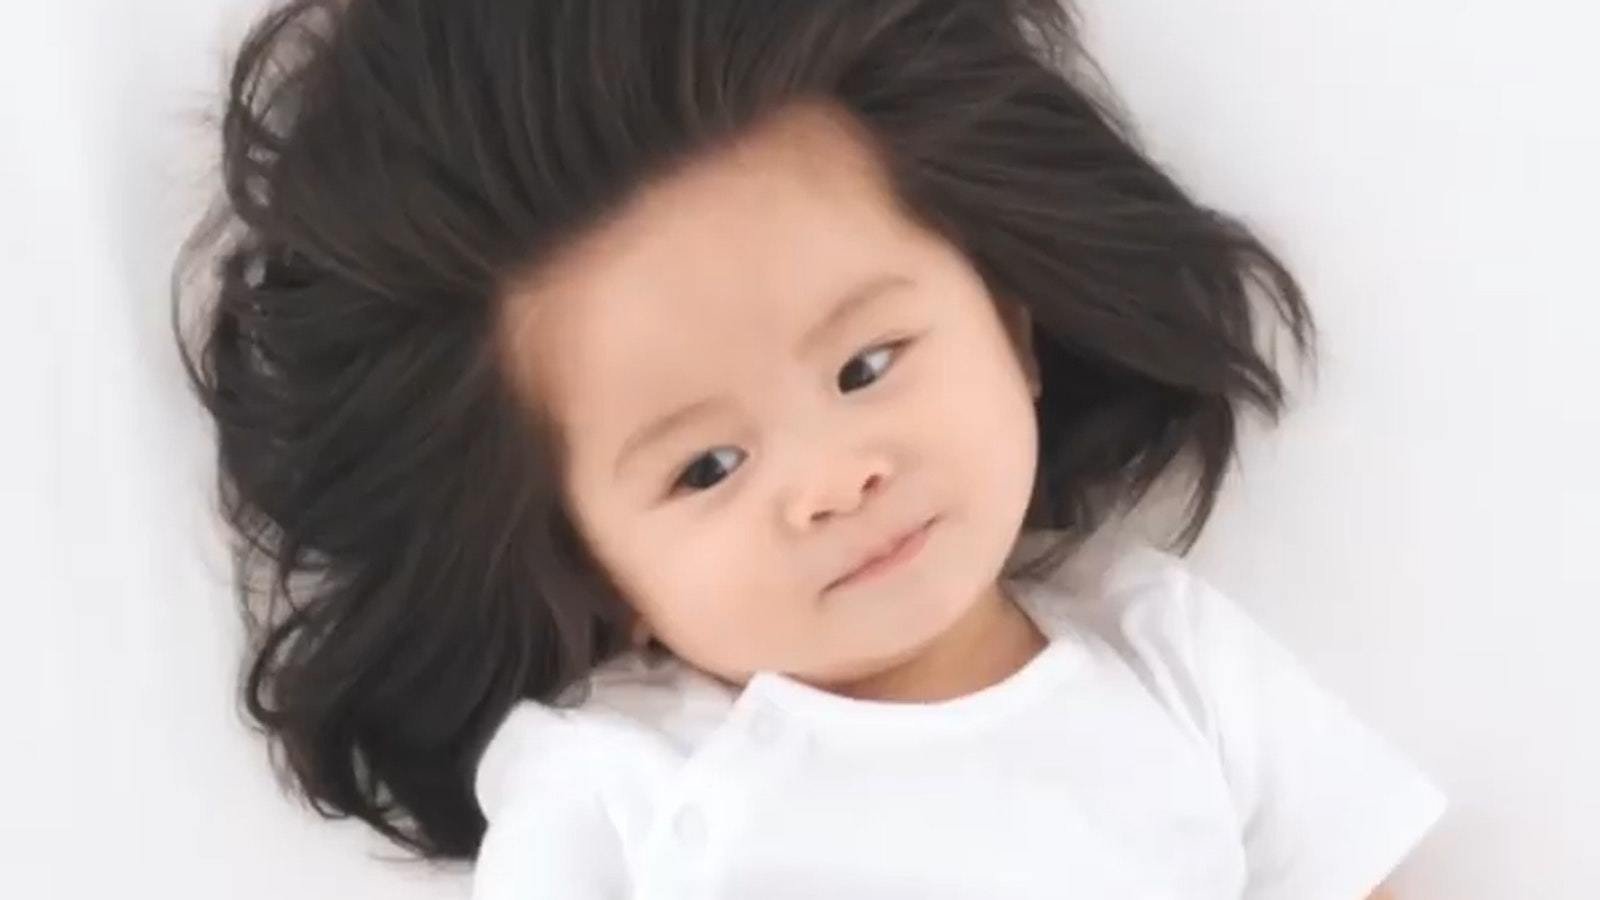 This baby has hair so incredible she's now starring in a campaign